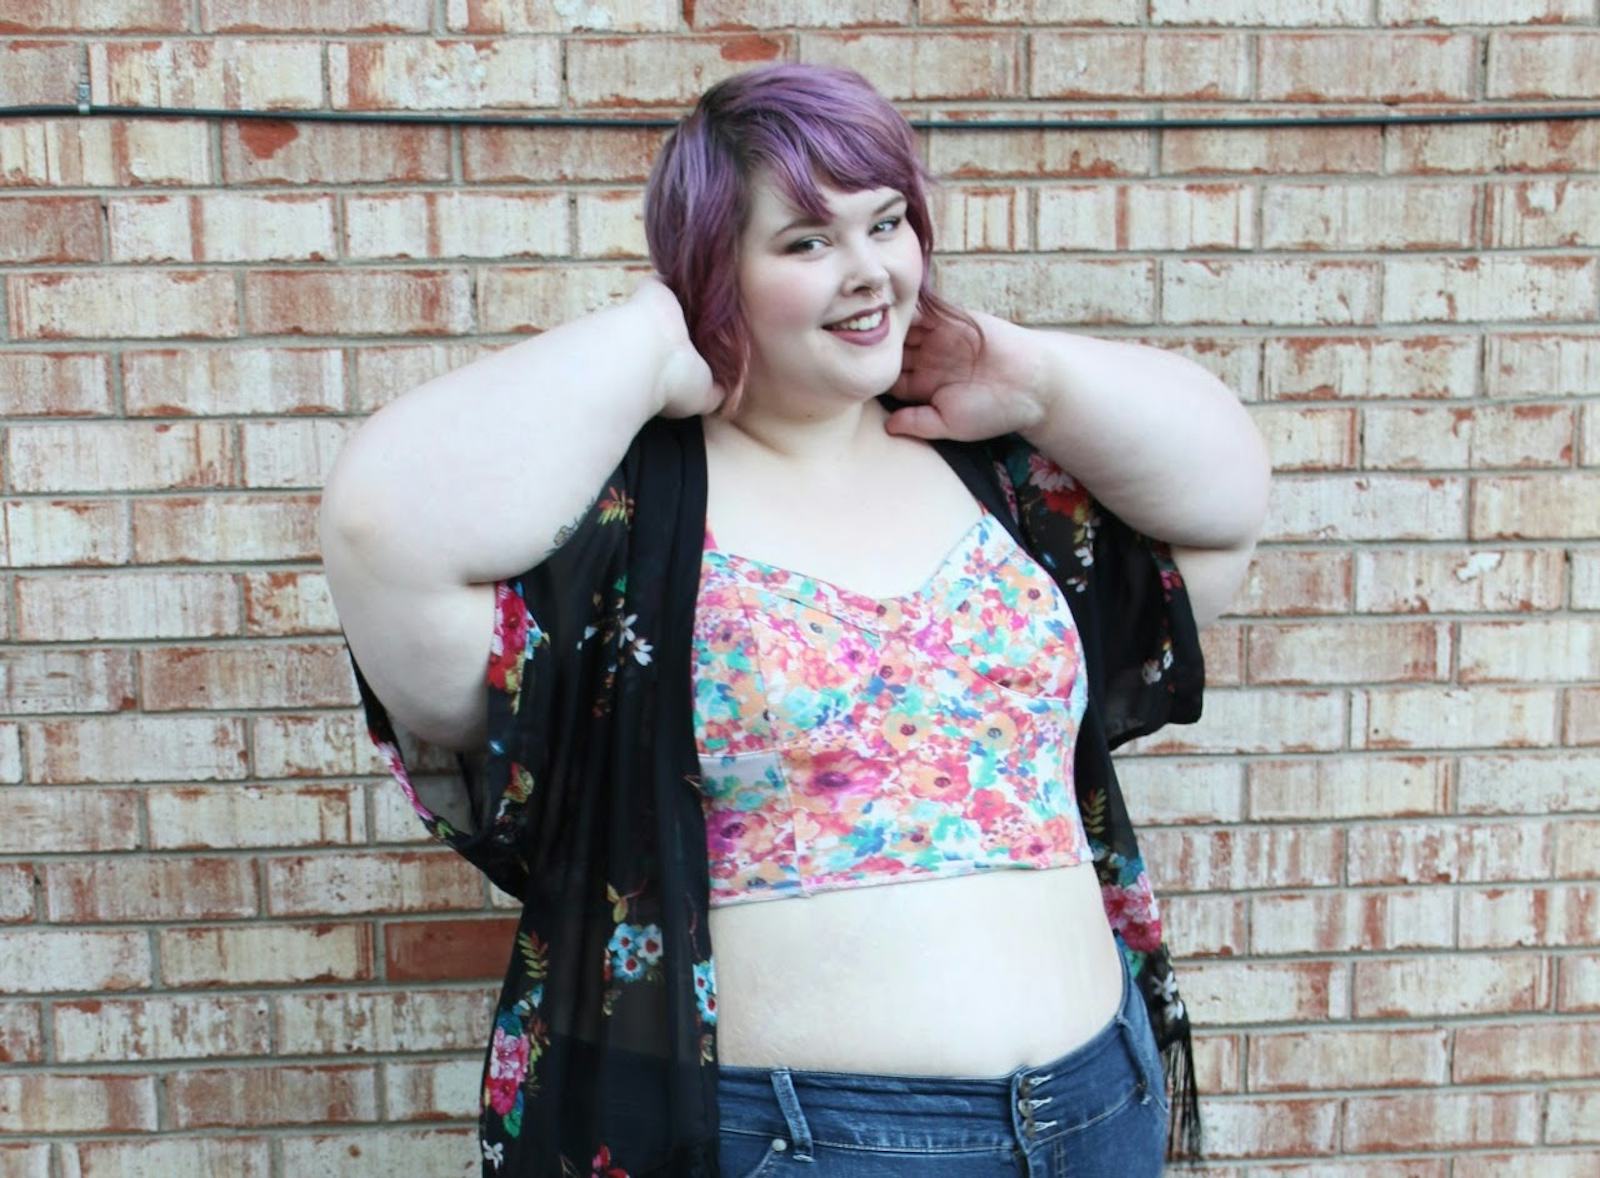 56 Photos Of Plus Size Individuals With Small Boobs Because Fat ...